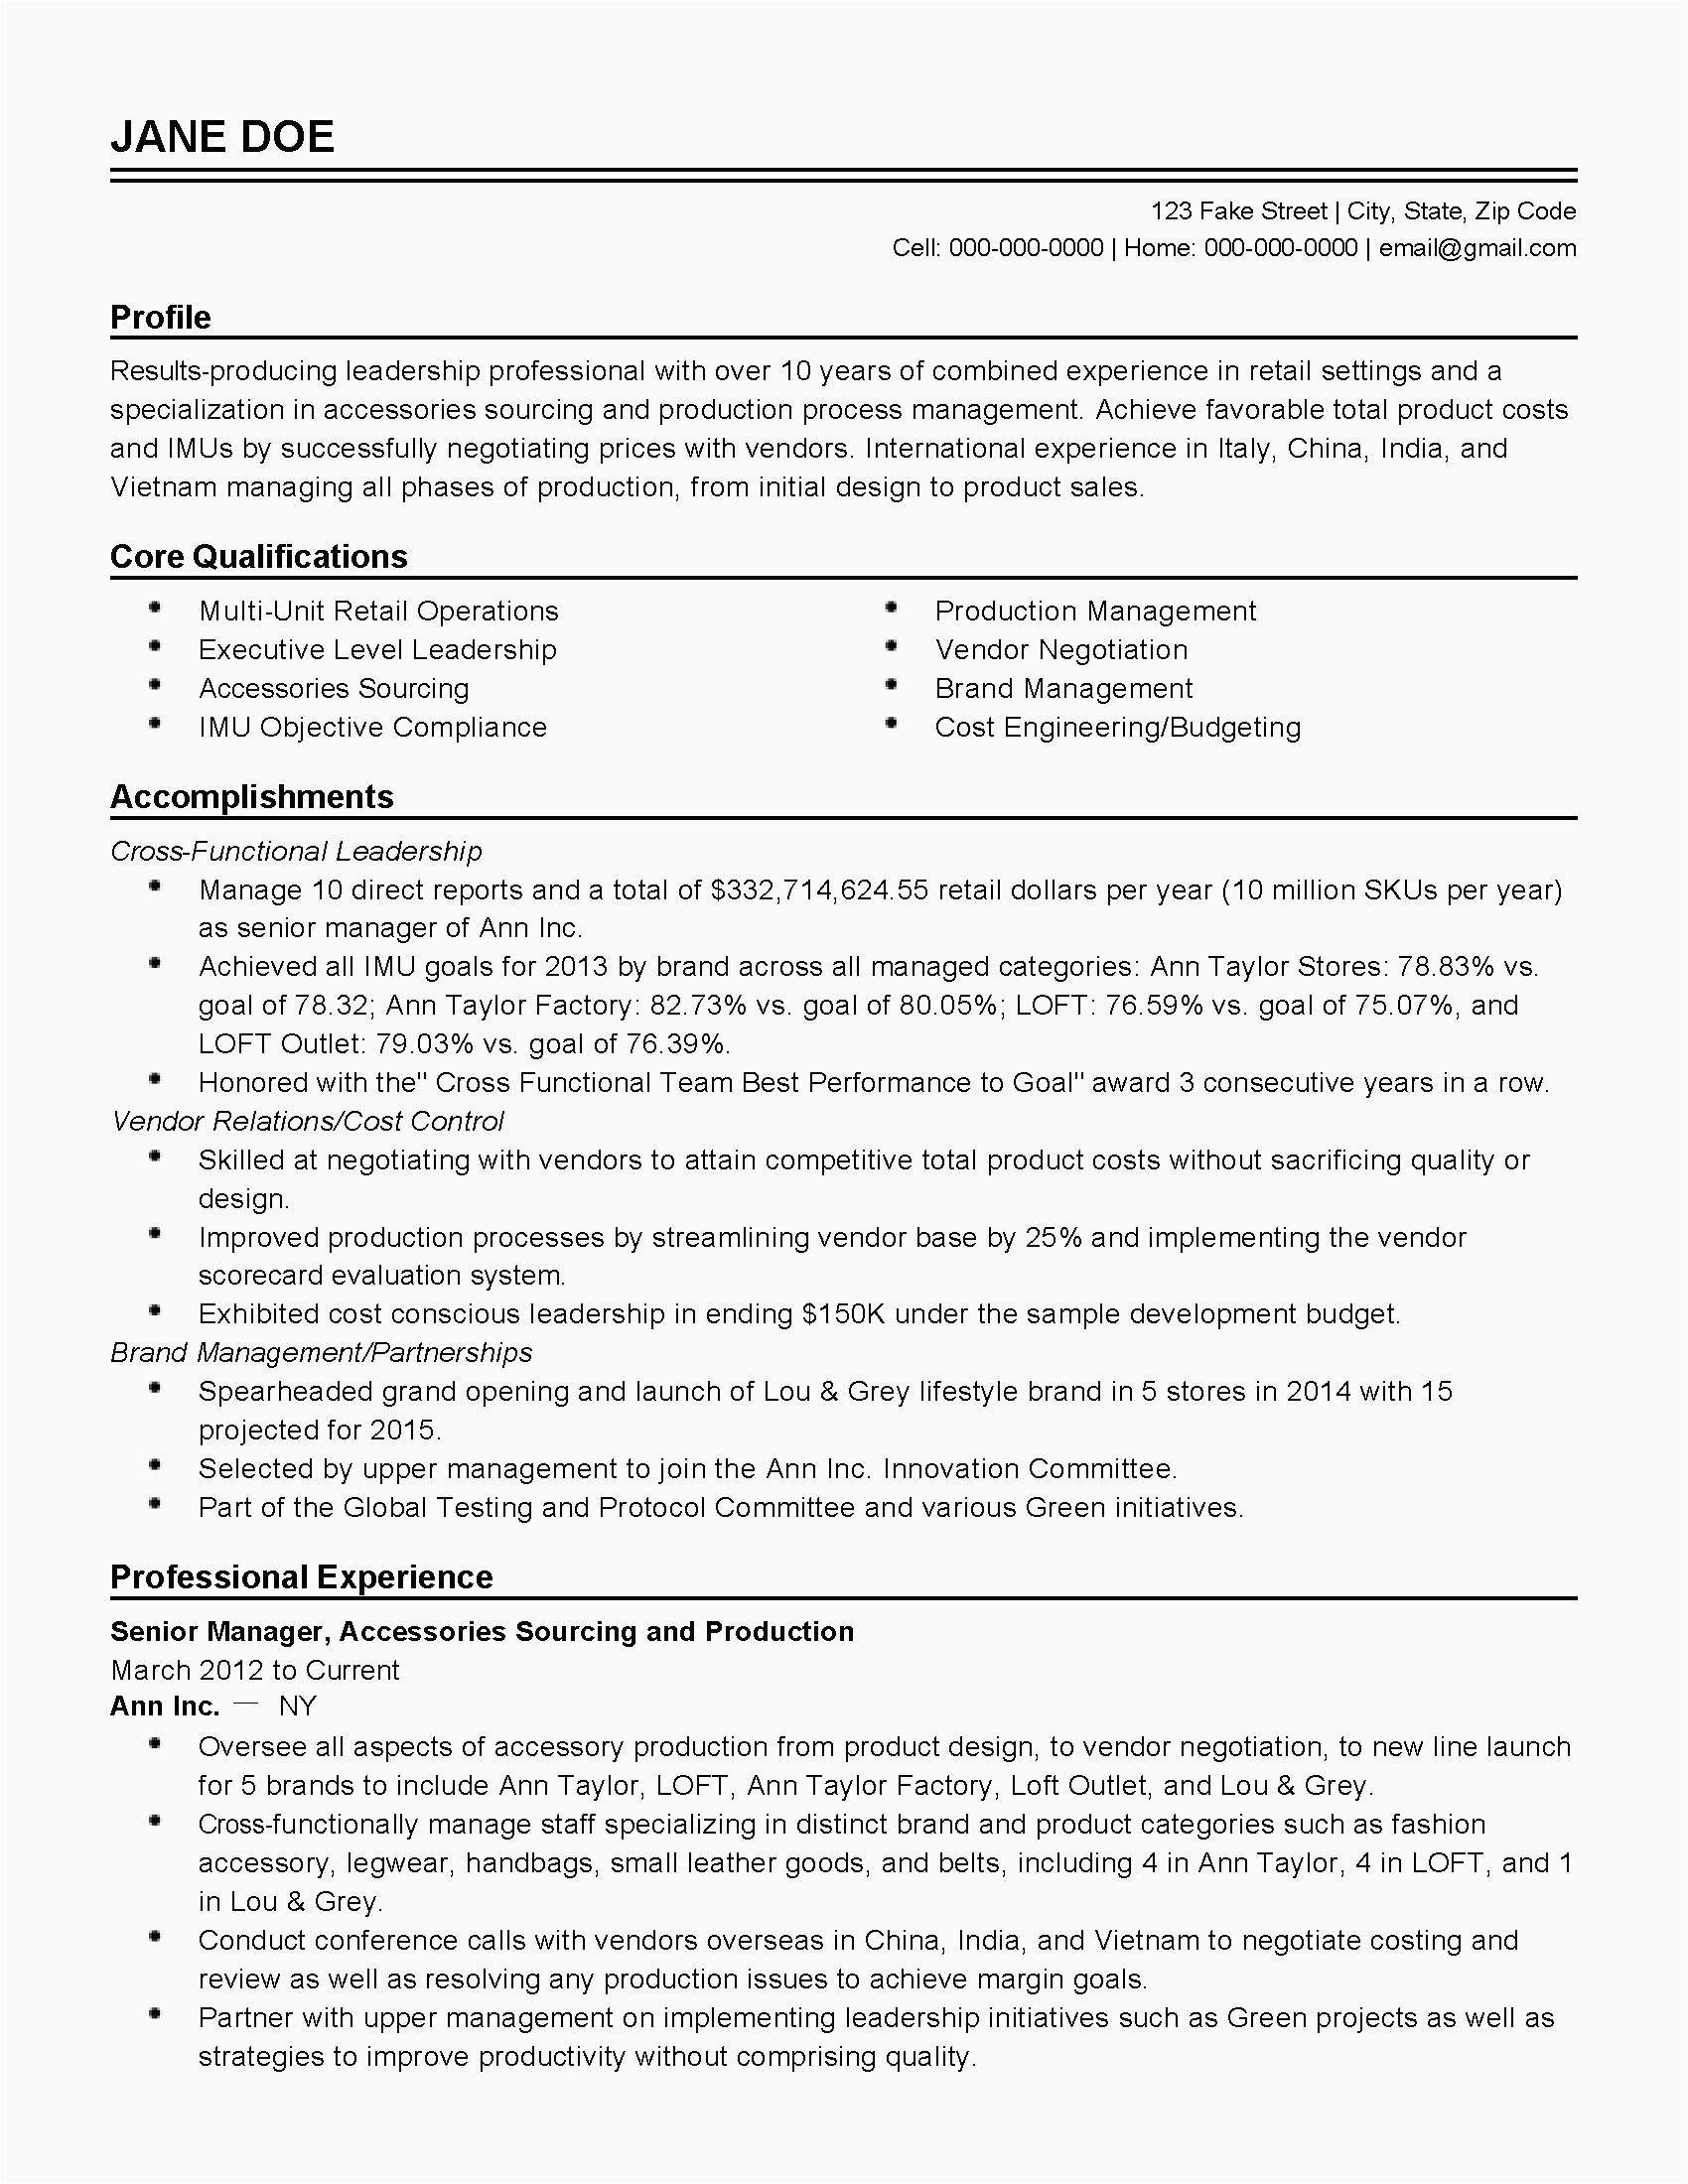 Sample Resume for Year 10 Work Experience Resume format 10 Years Experience Resume Templates